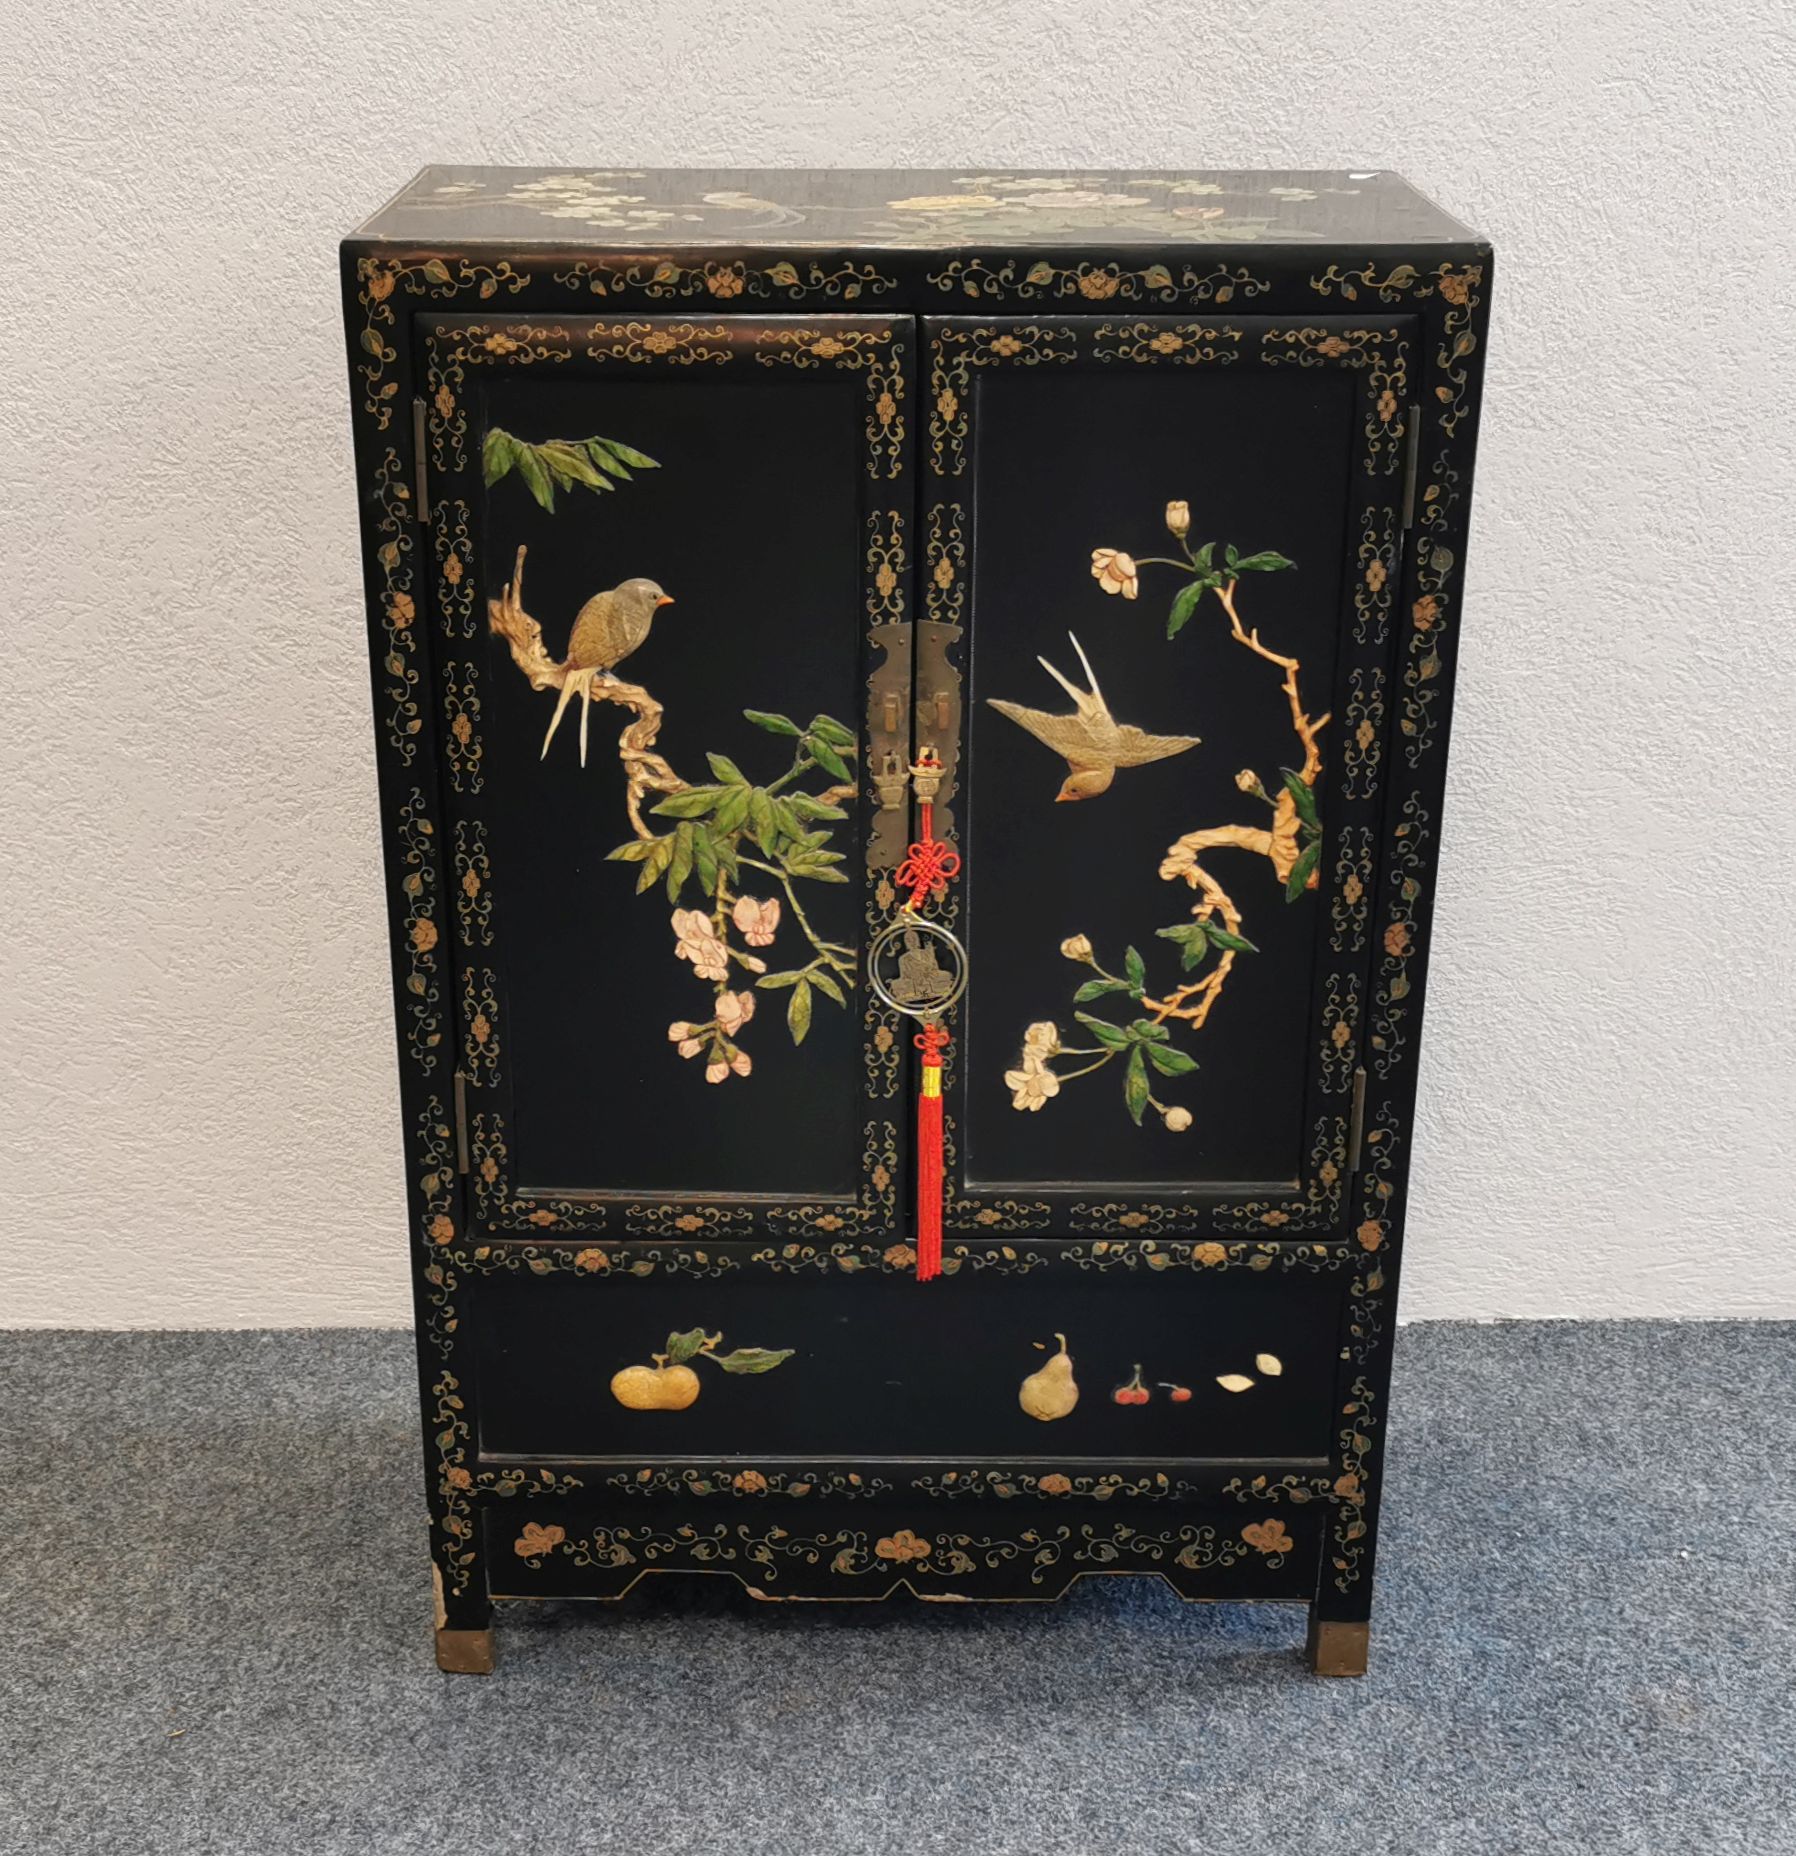 CHINOISE LACQUER CABINET